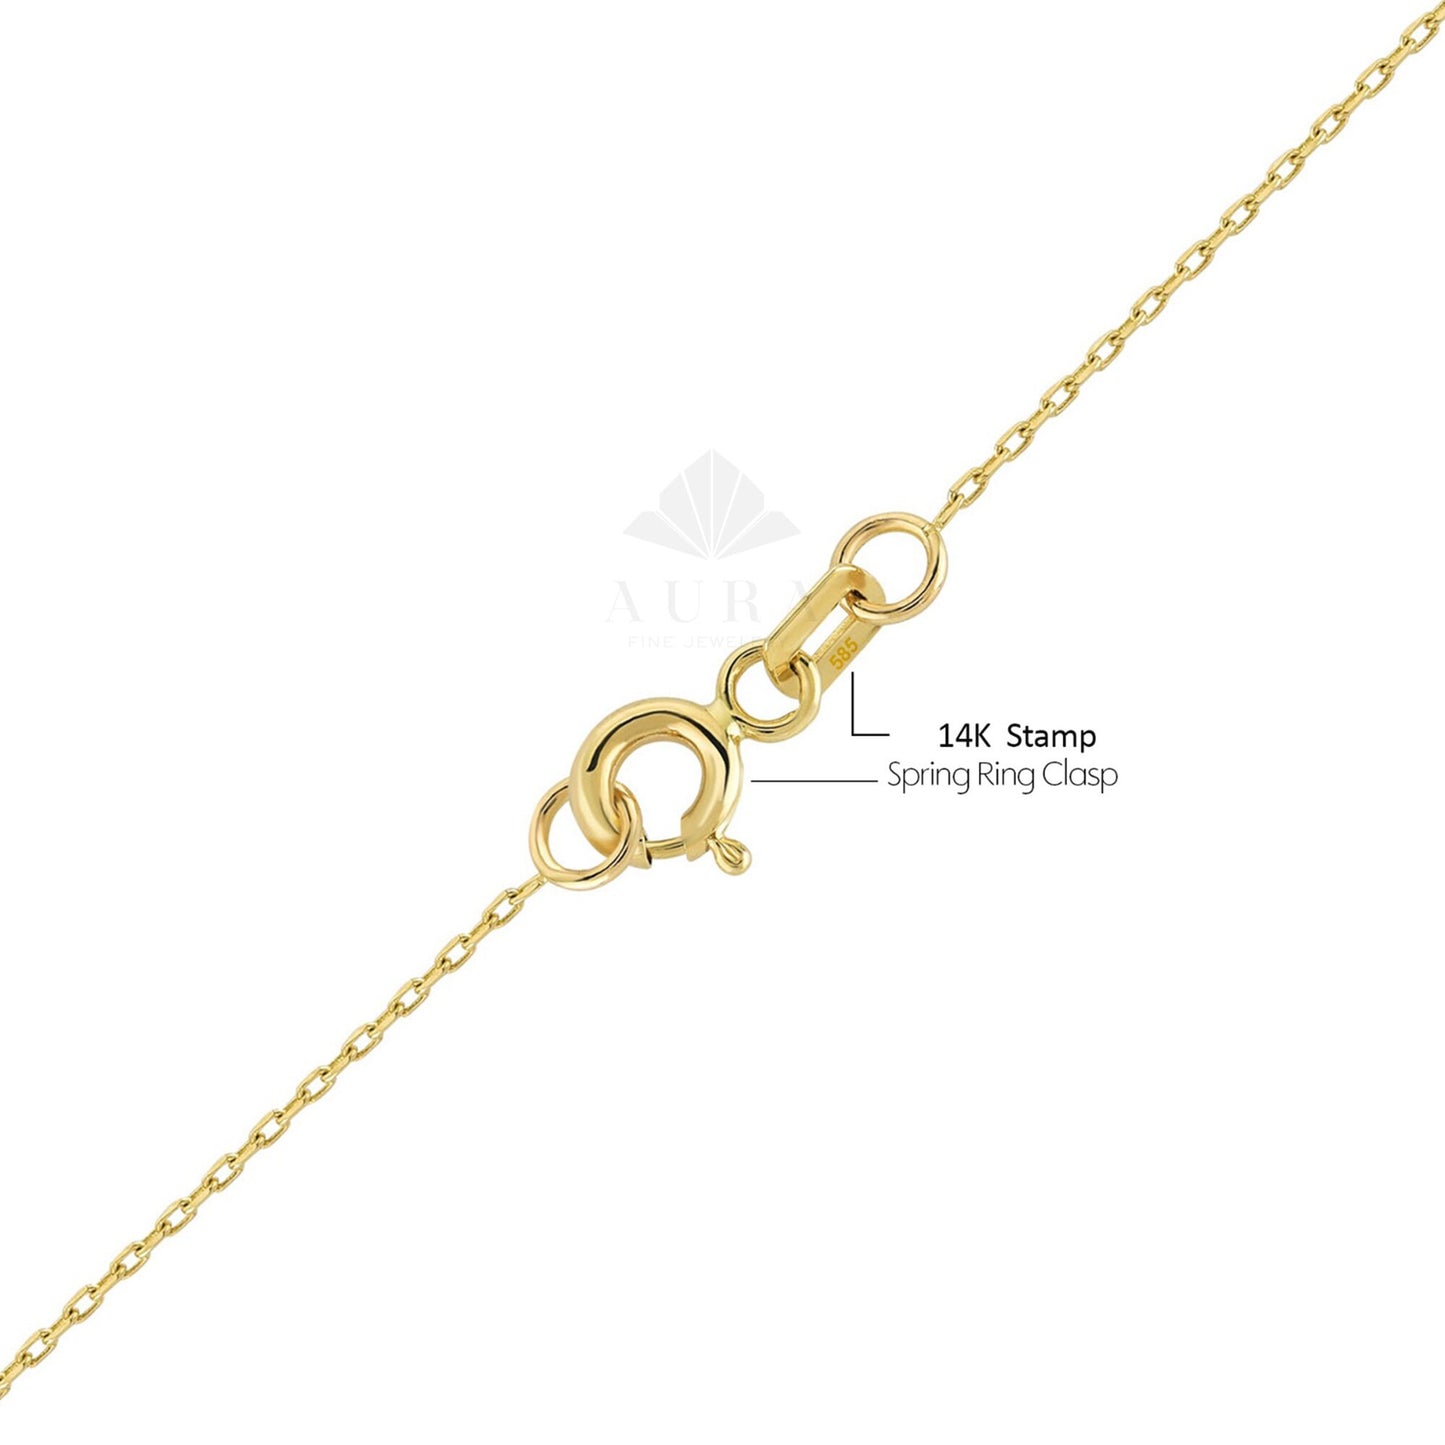 14K Solid Gold Diamond Cut Cable Chain 16" 18" 20" 22" 24", 0.7 mm - Unisex - Gold Chain for Women Men, Custom Size and Gold Color